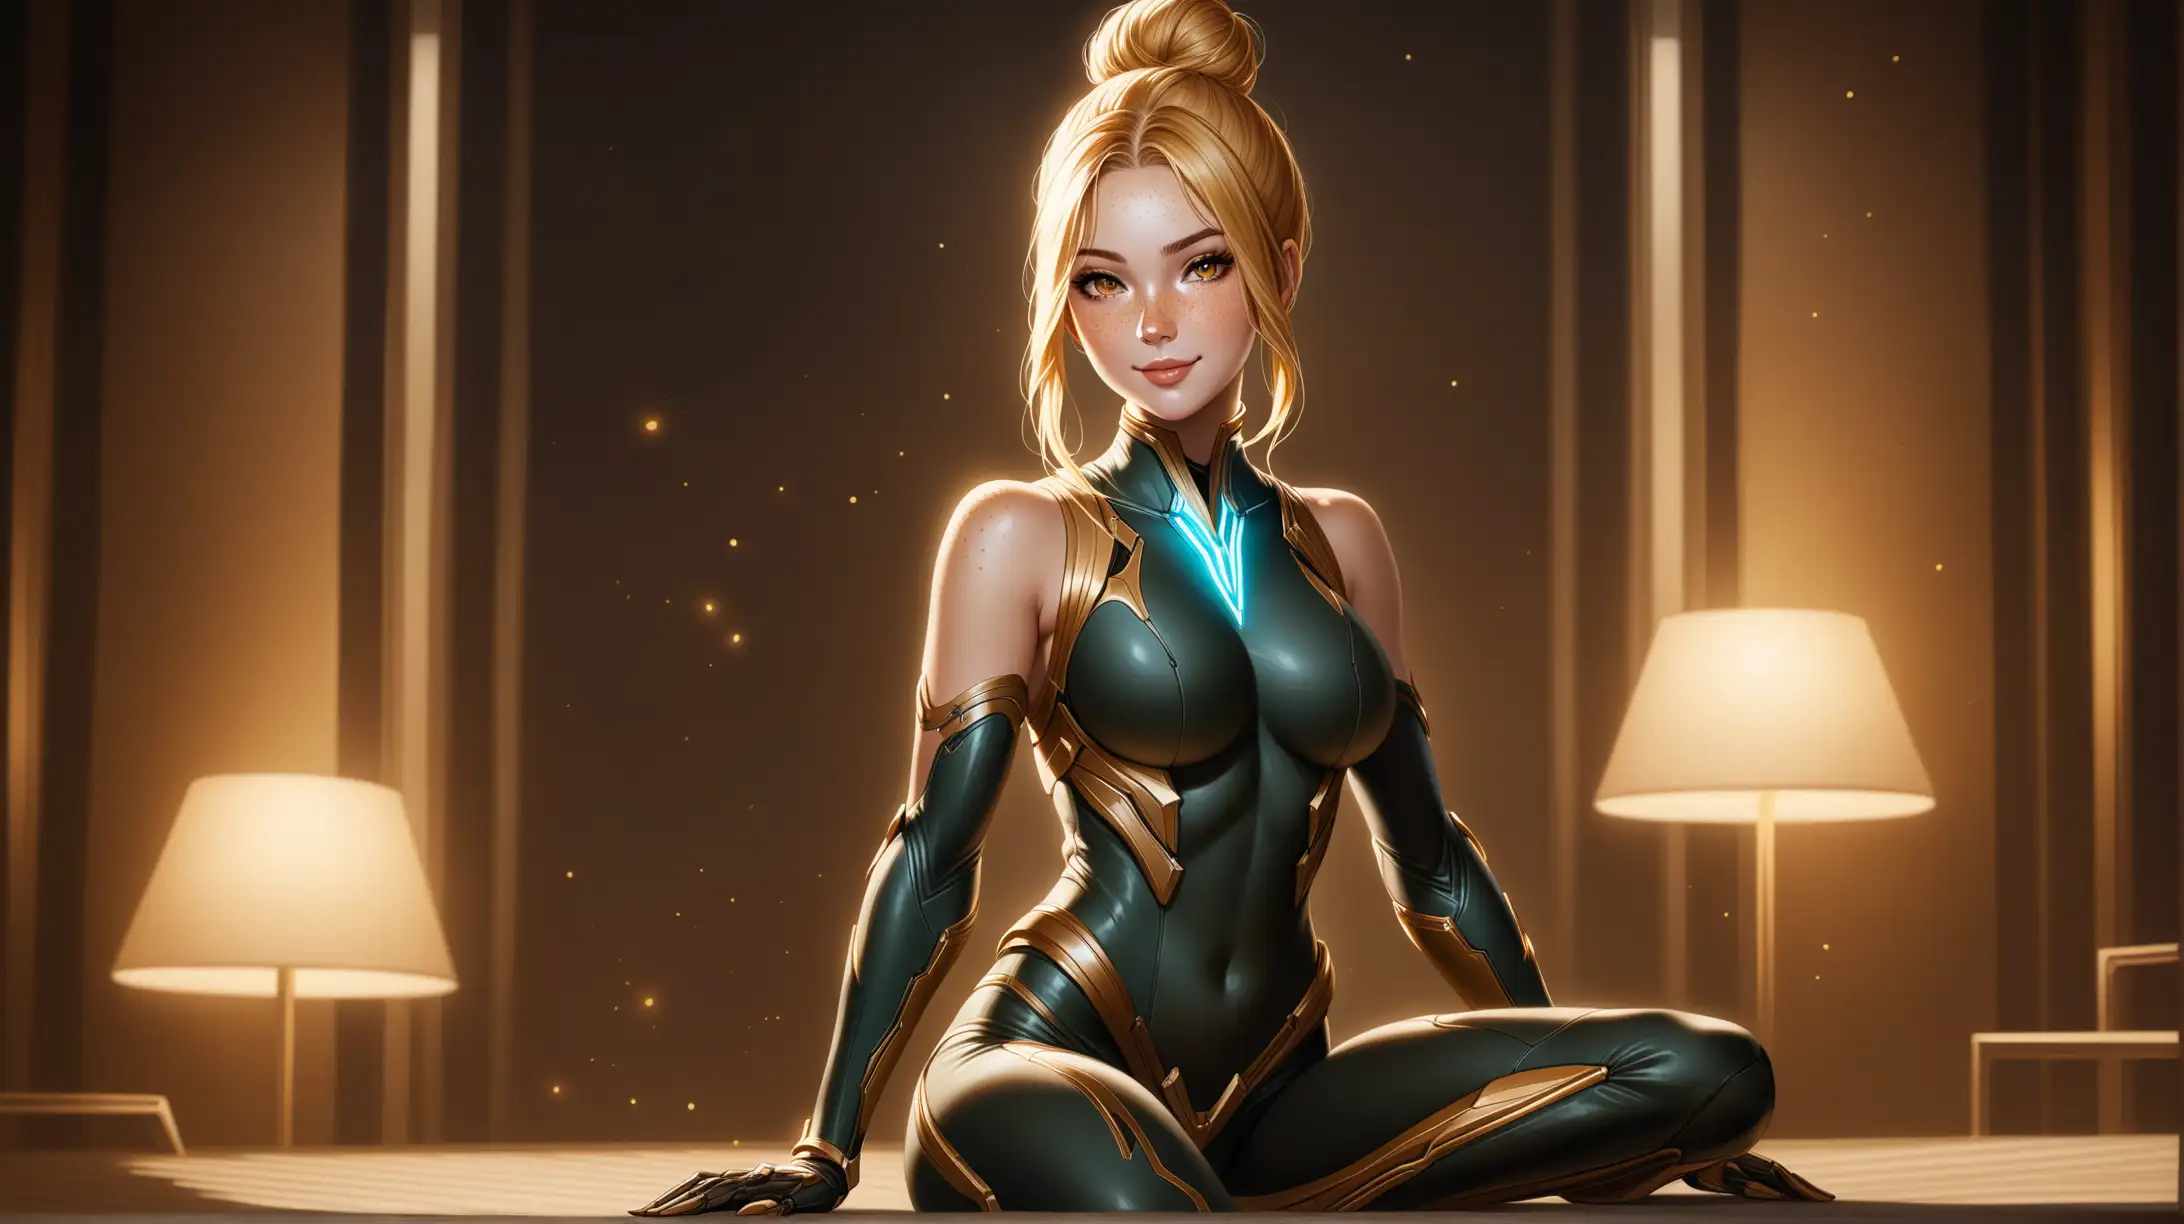 Draw a woman, long blonde hair in a bun, gold eyes, freckles, perky body, outfit inspired from Warframe, high quality, realistic, long shot, ambient lighting, indoors, sitting, seductive, smiling toward the viewer